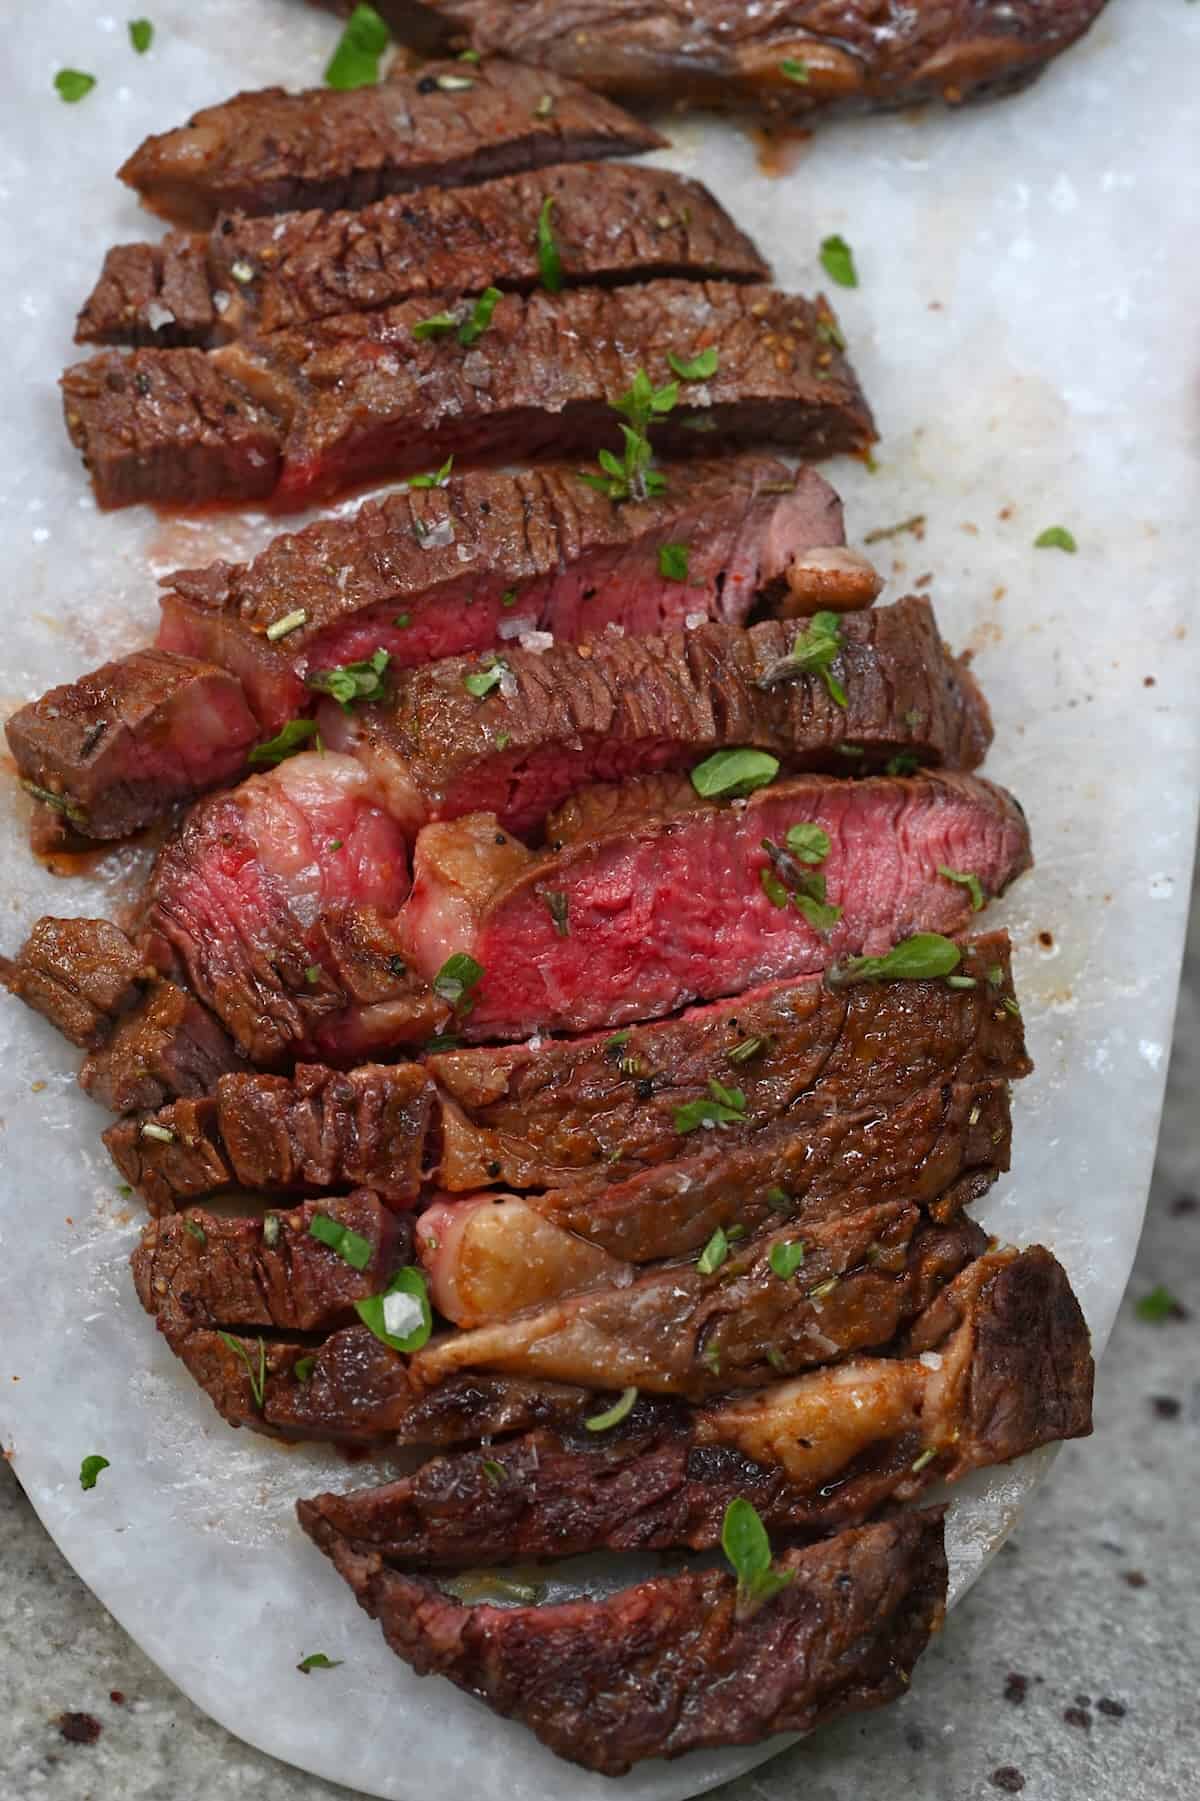 A serving of ribeye steak cut into slices